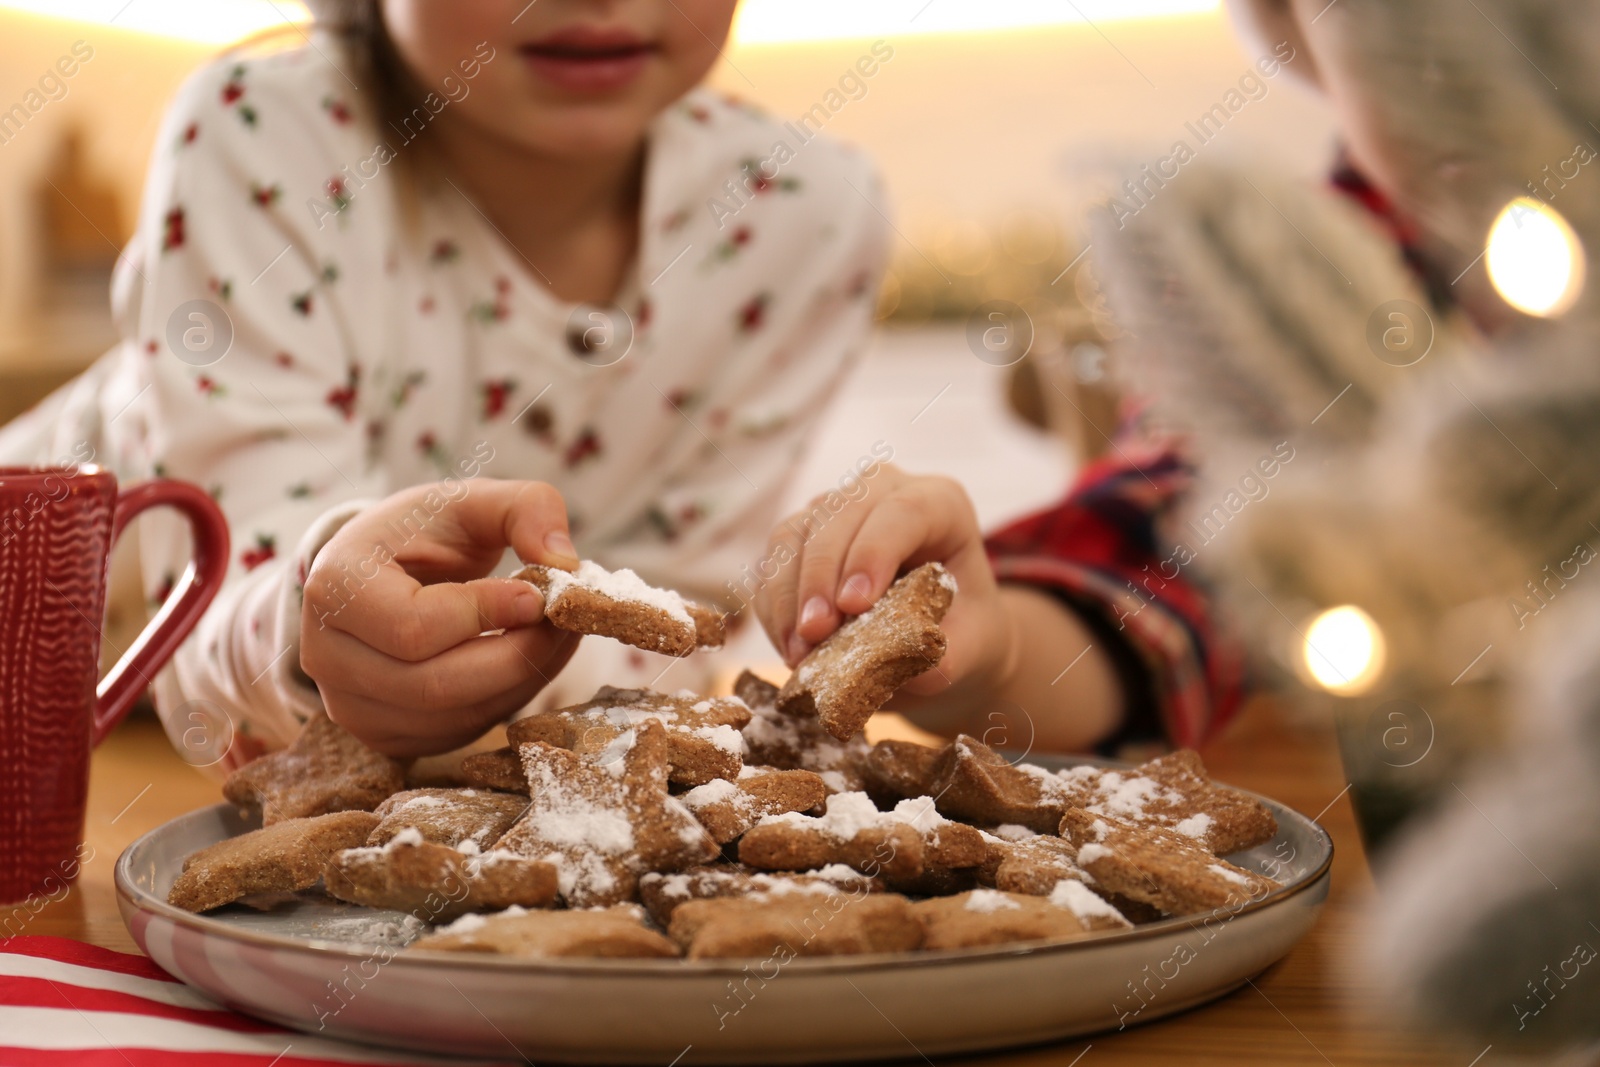 Photo of Little children taking tasty Christmas cookies from plate at table, closeup